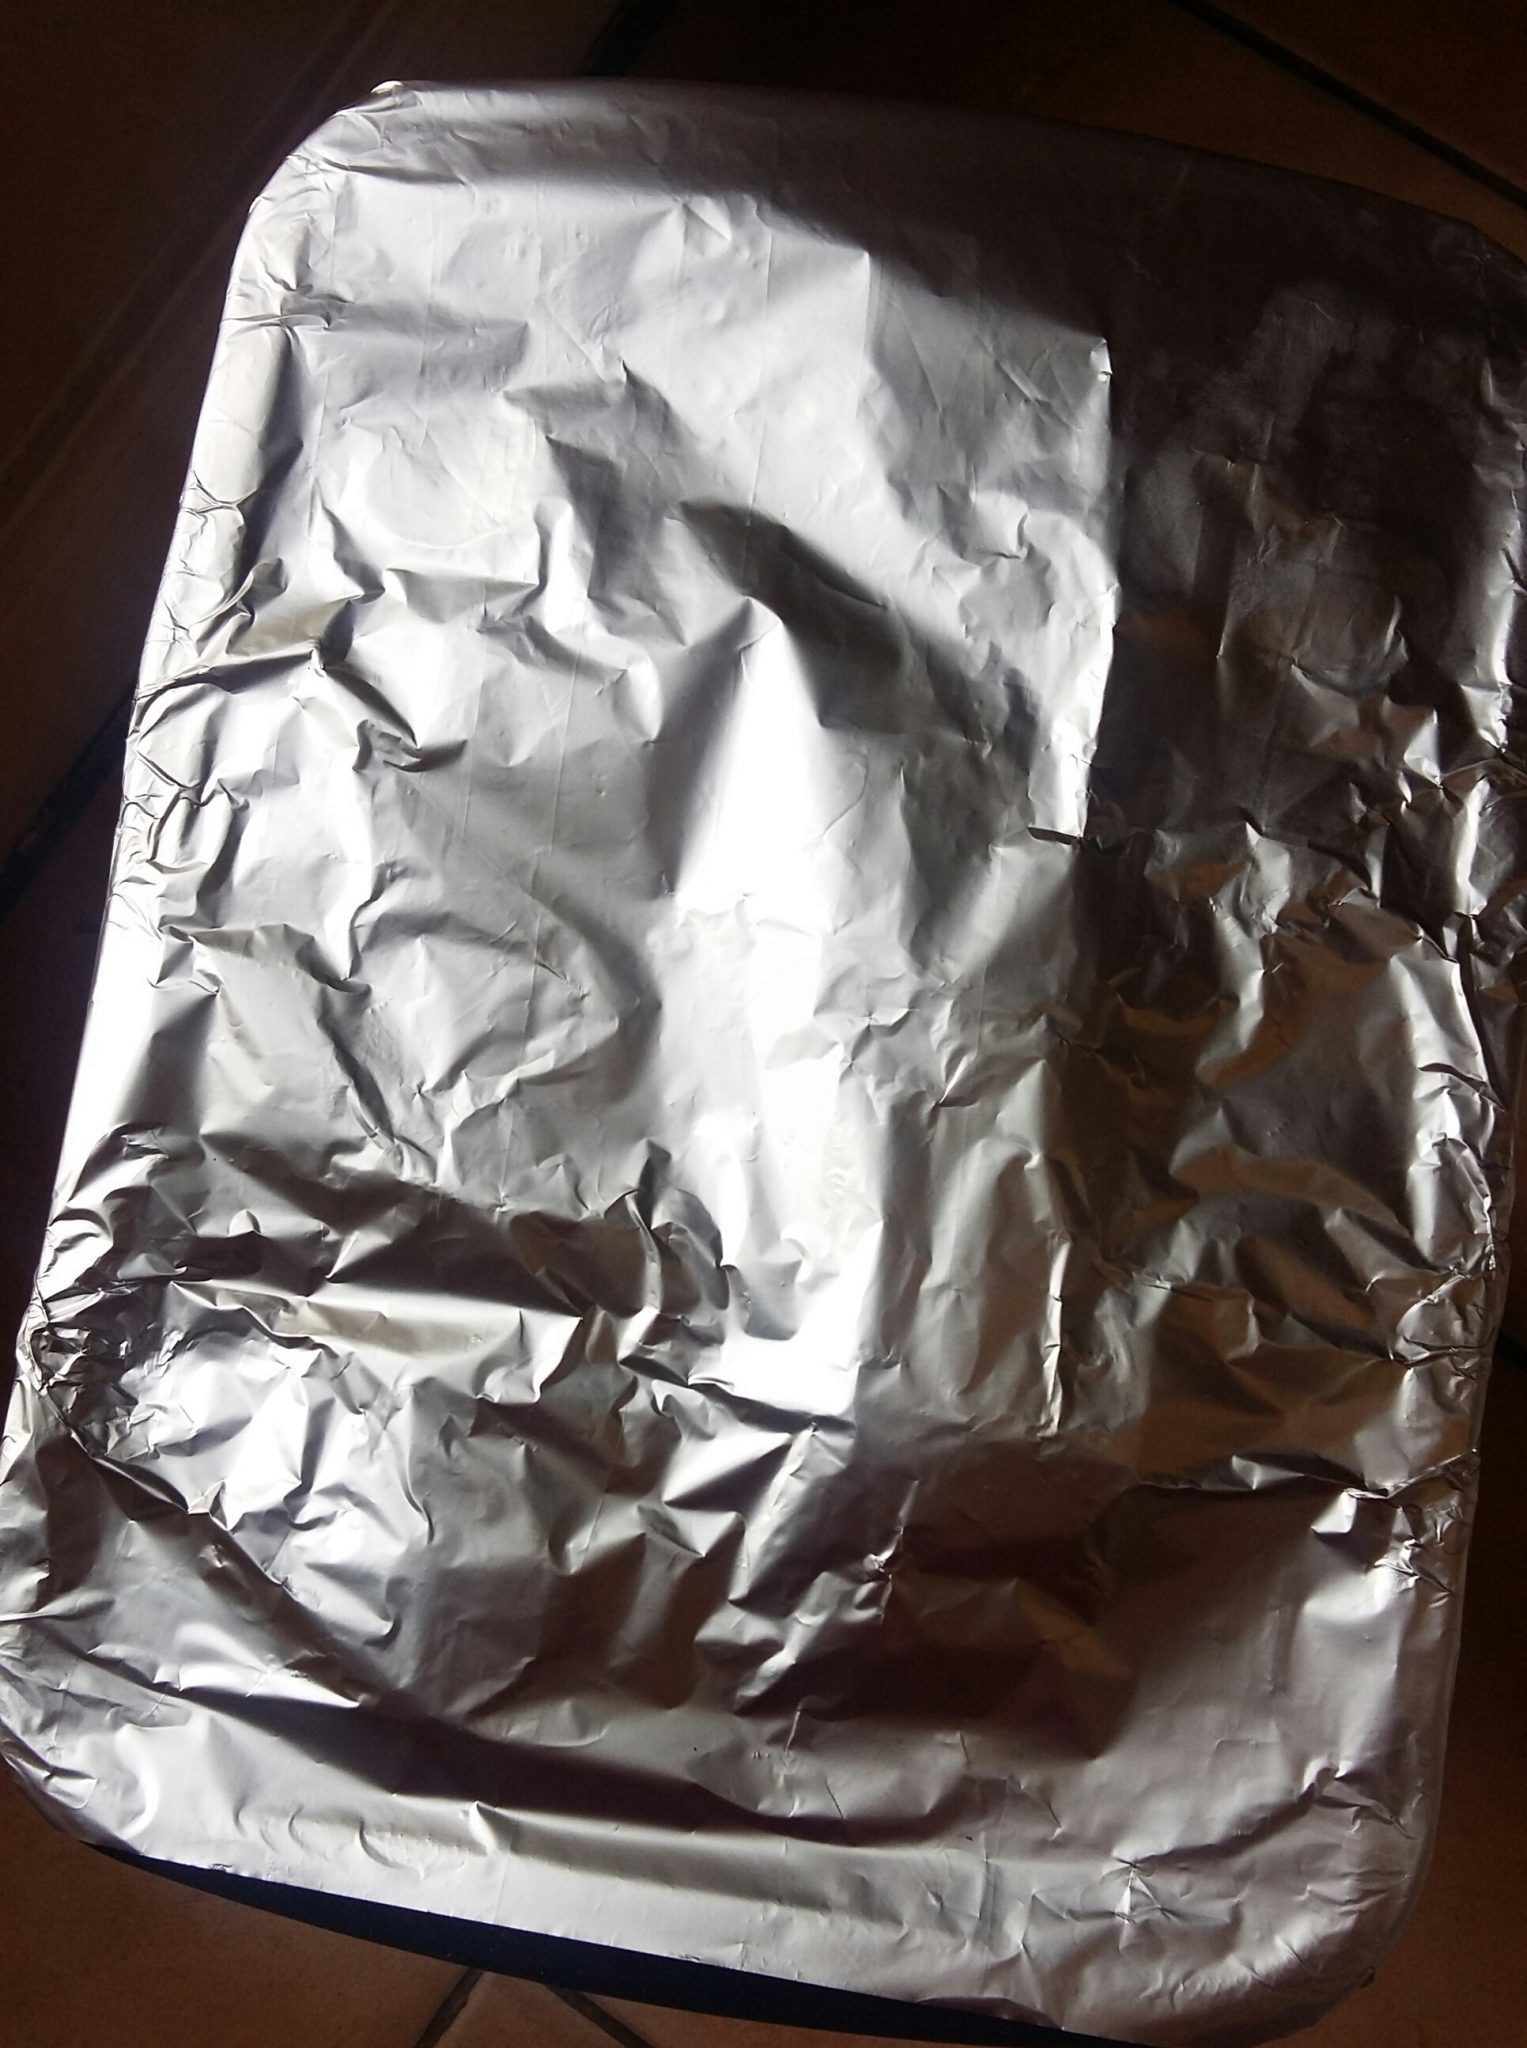 Cover tightly with foil and bake at 200 C for 45 minutes. Uncover, then bake 15 minutes longer until nicely browned